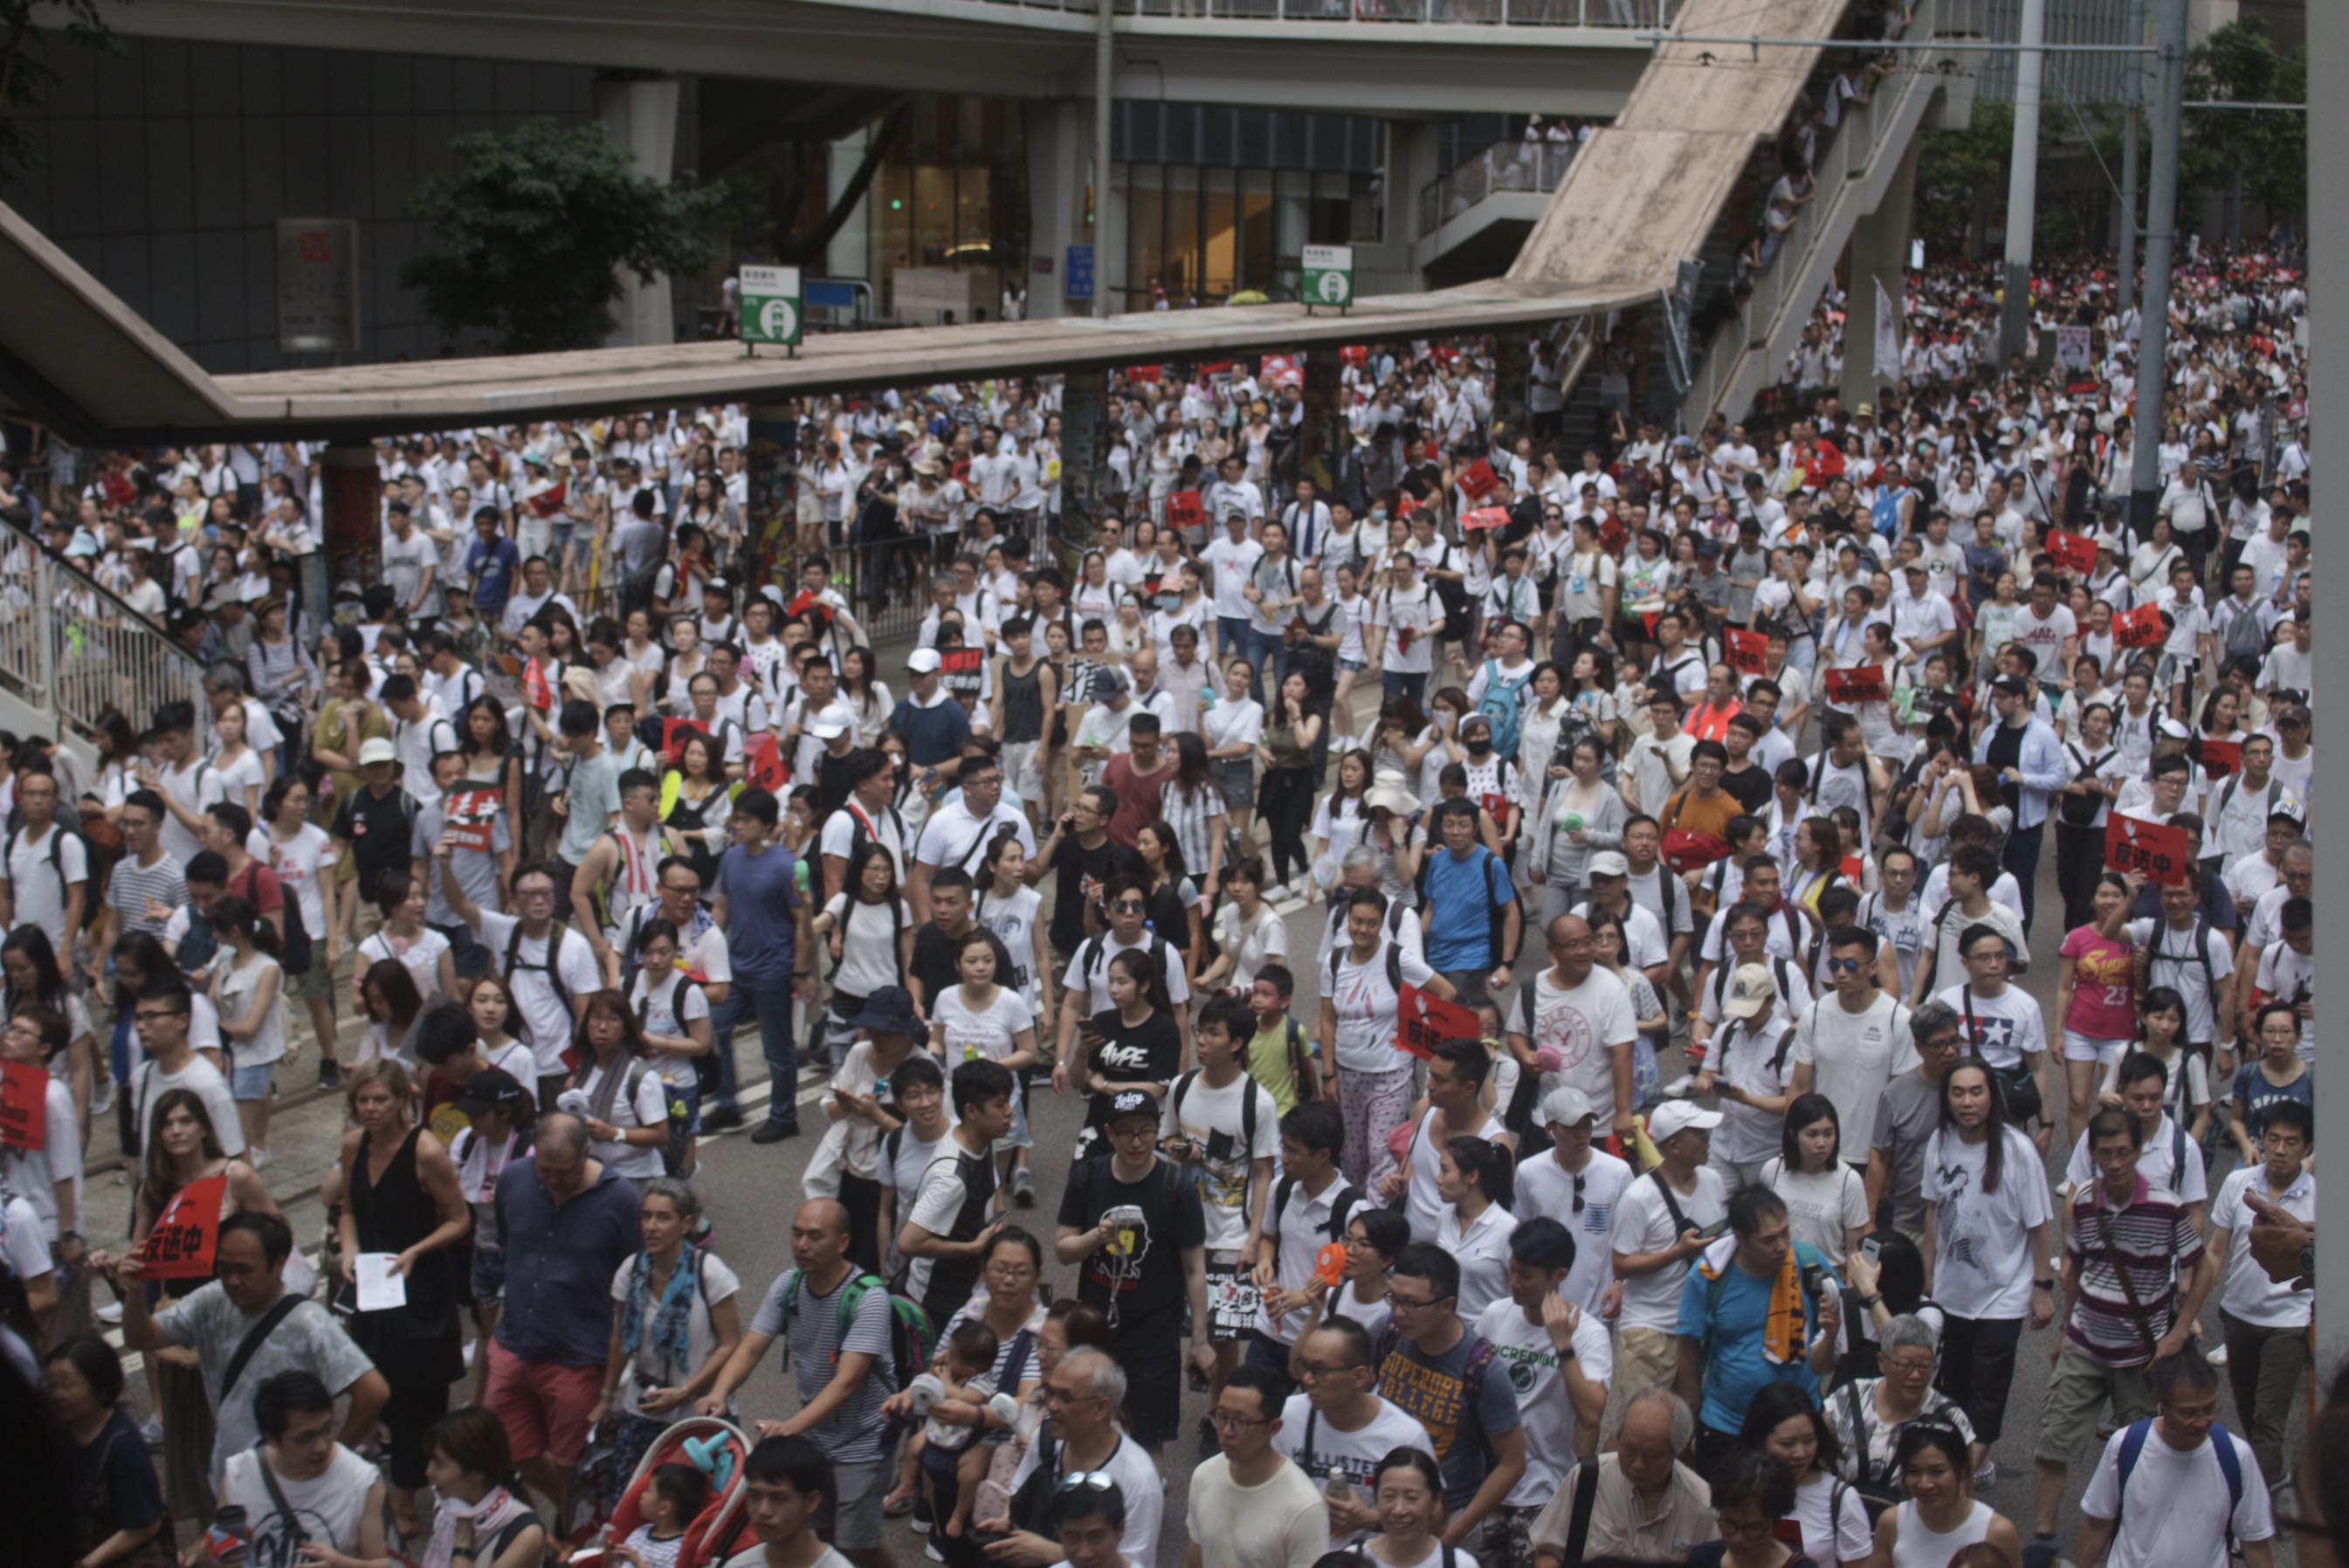 People protesting a controversial extradition bill head into Admiralty on Sunday, June 9. Photo by Vicky Wong.